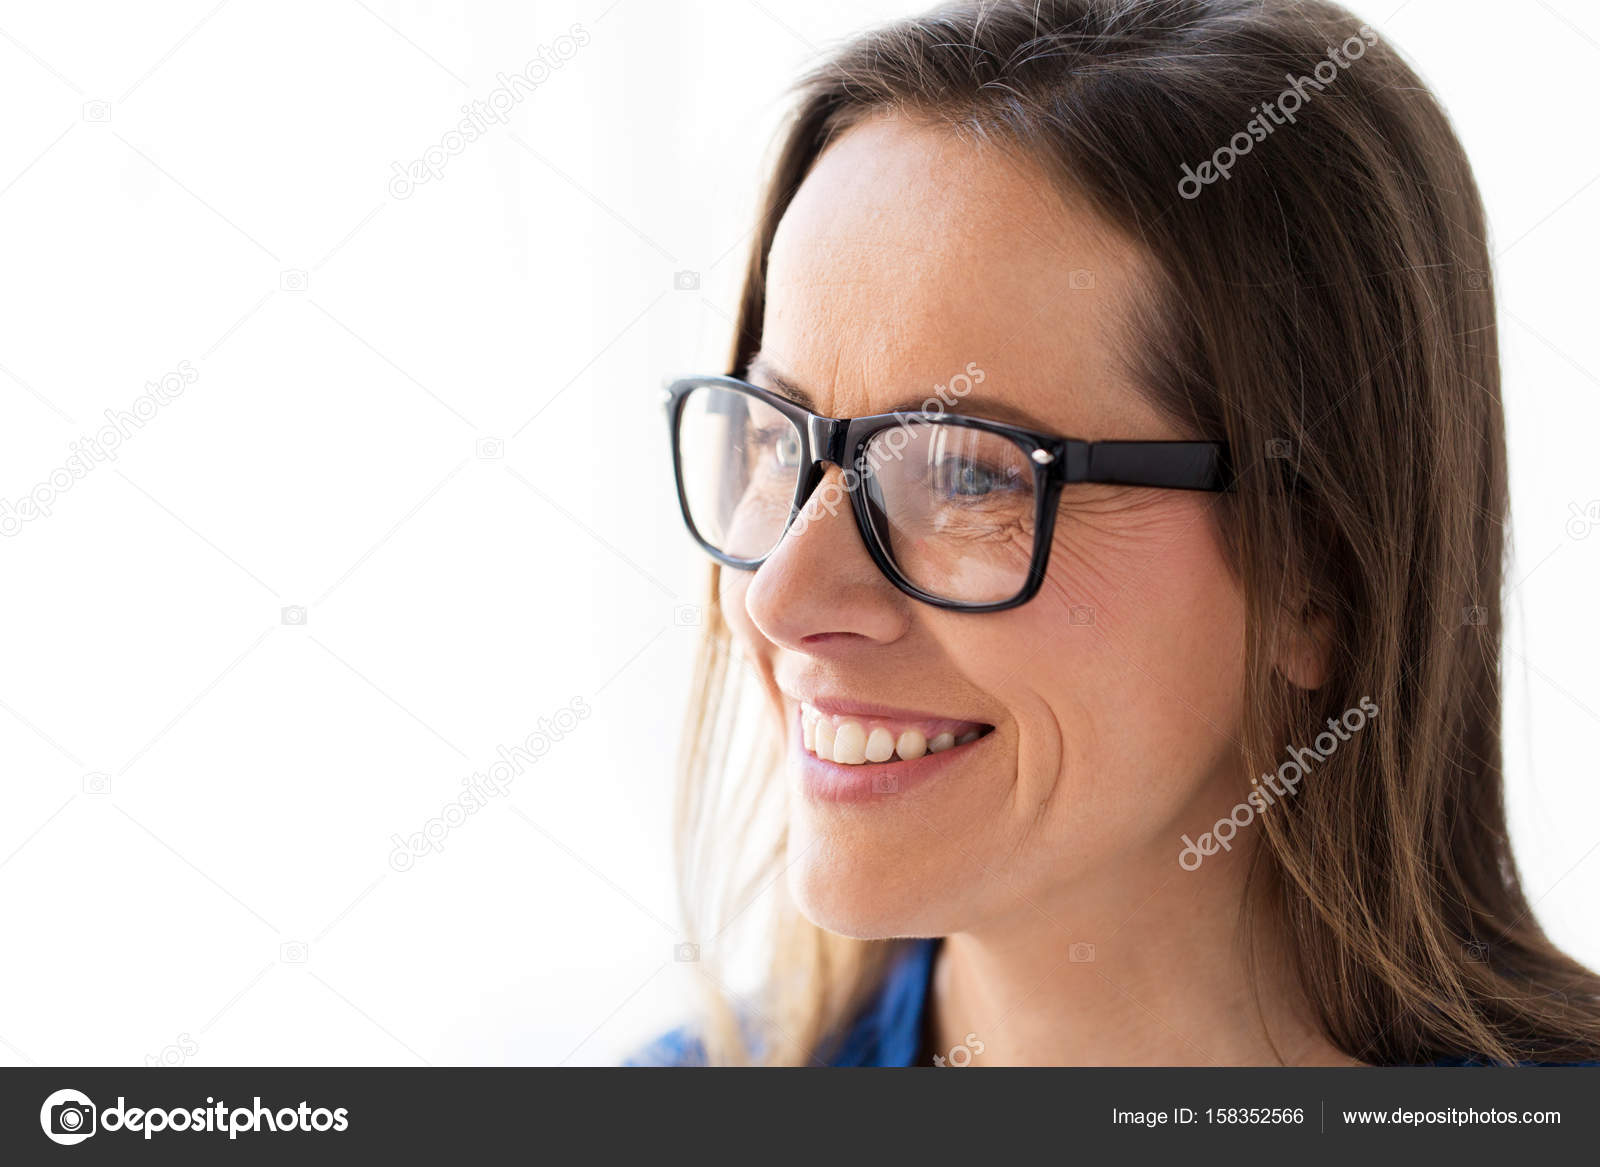 happy smiling middle aged woman at home Stock Photo